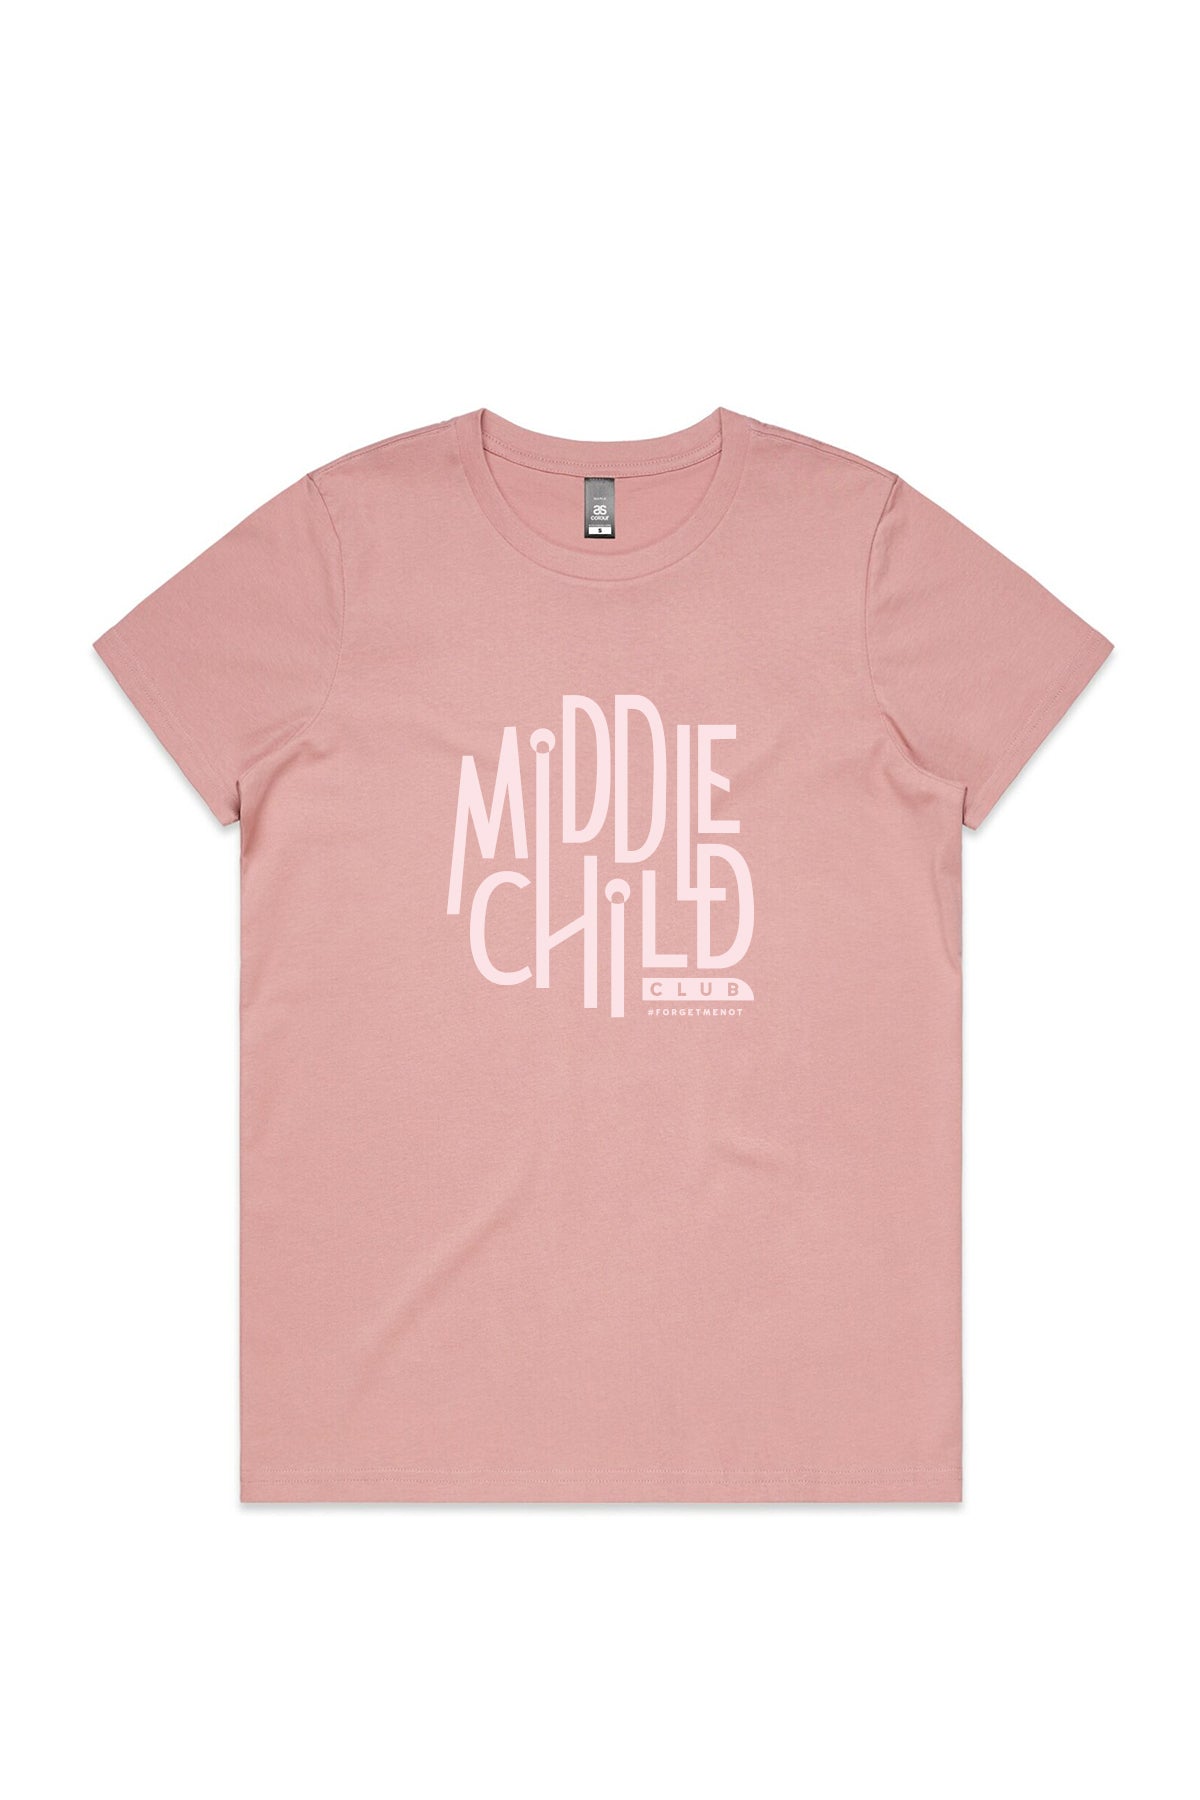 A rose pink coloured t-shirt is pictured flat against a white background. The t-shirt has the words middle child club written across the chest in graphic text in a light pink colour.